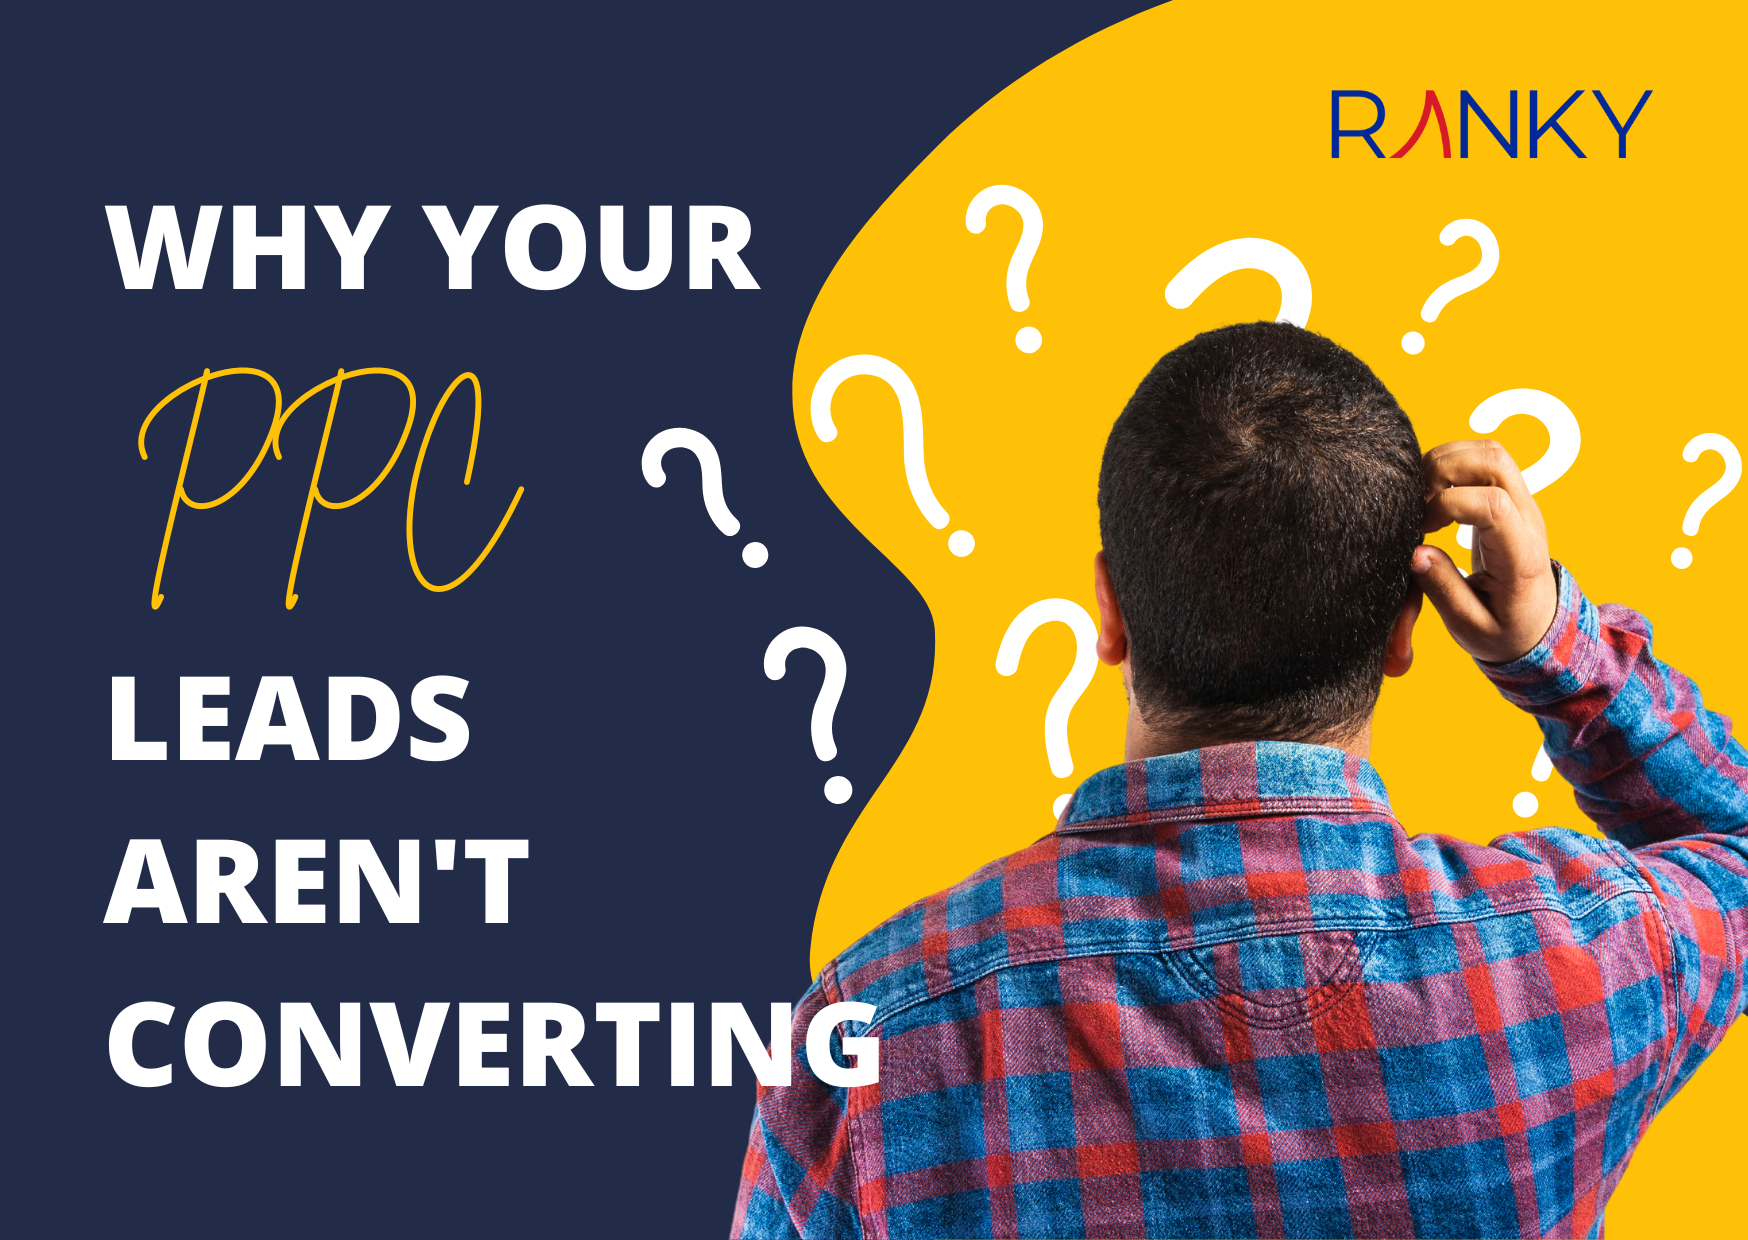 Here’s Why Your PPC Leads Are Not Converting